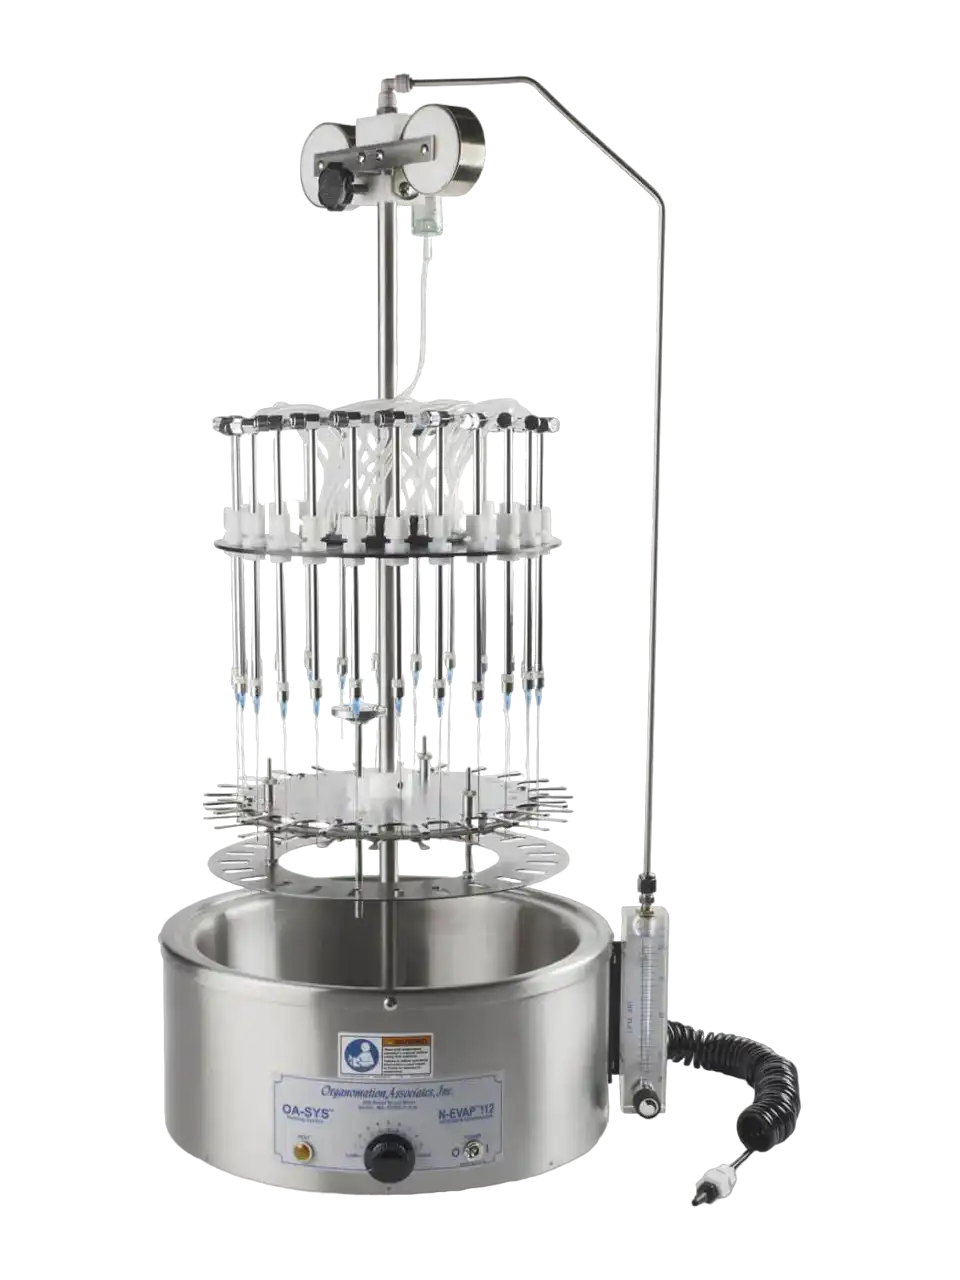 Nitrogen Evaporator, N-EVAP Series, Standard, with Water Bath (30-90°C and 900 W), Analog Control, 24 Sample Positions